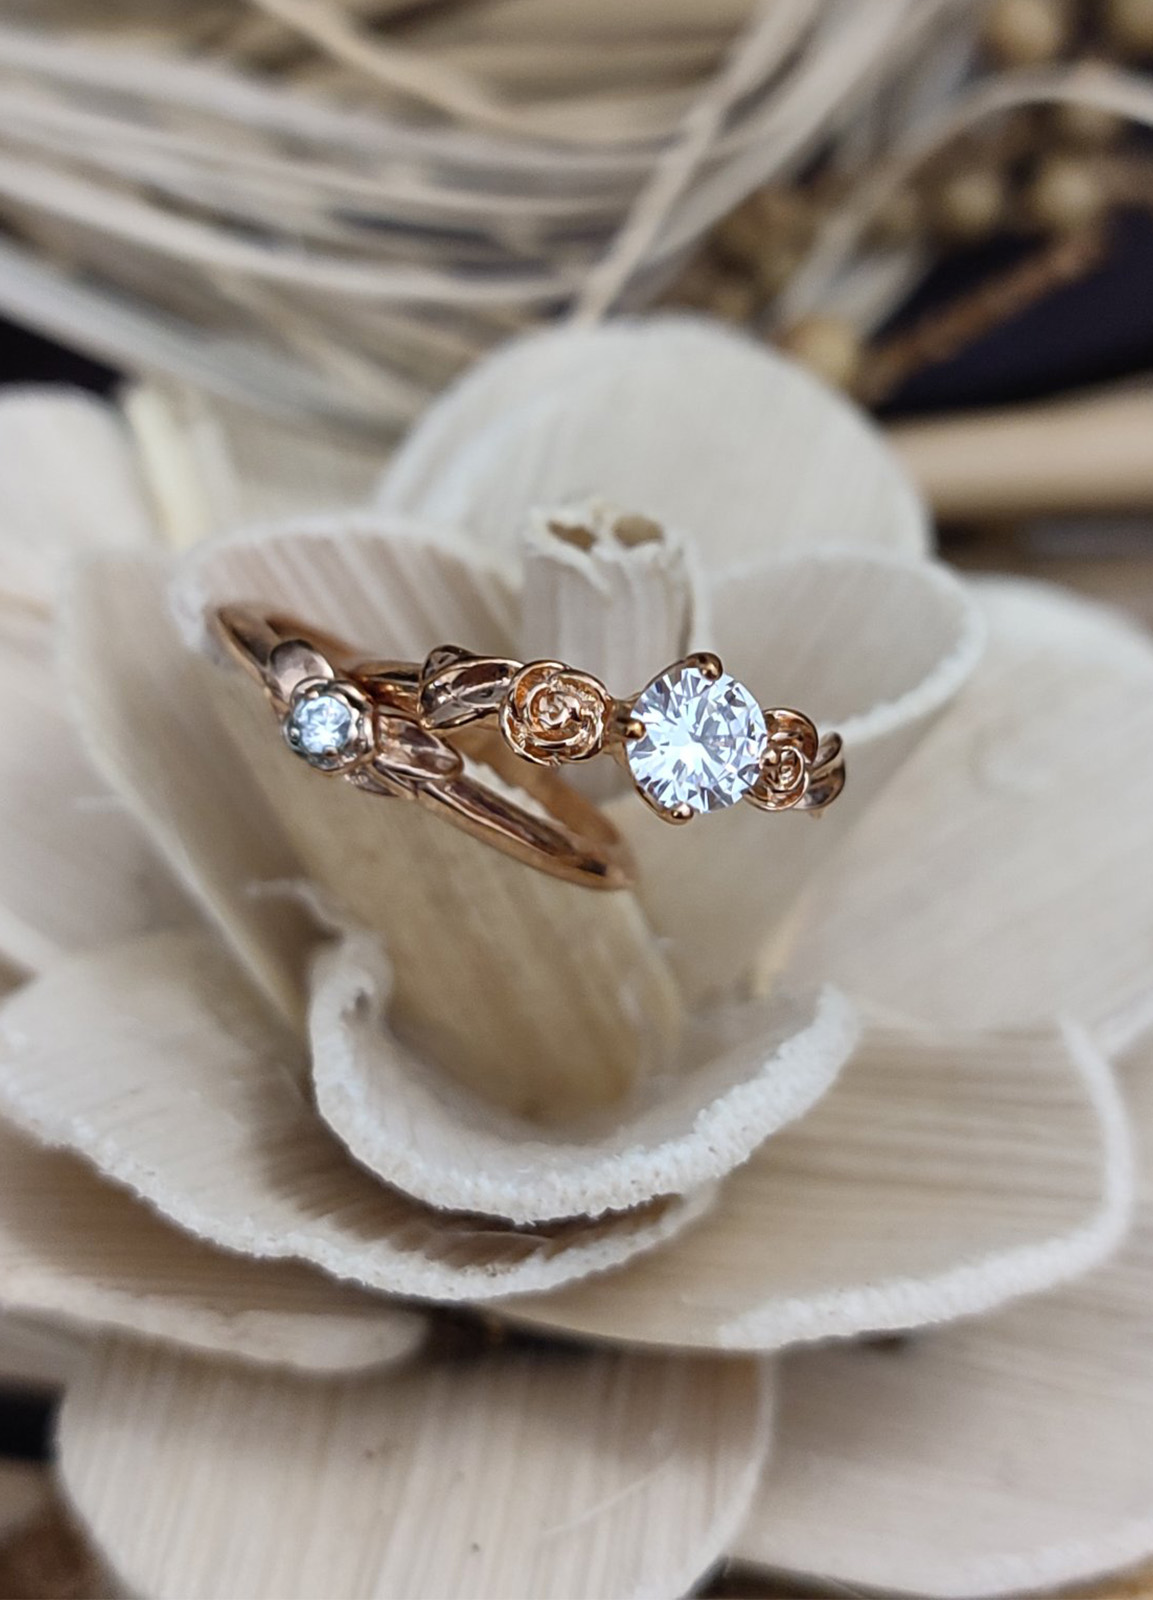 Double Rose Ring